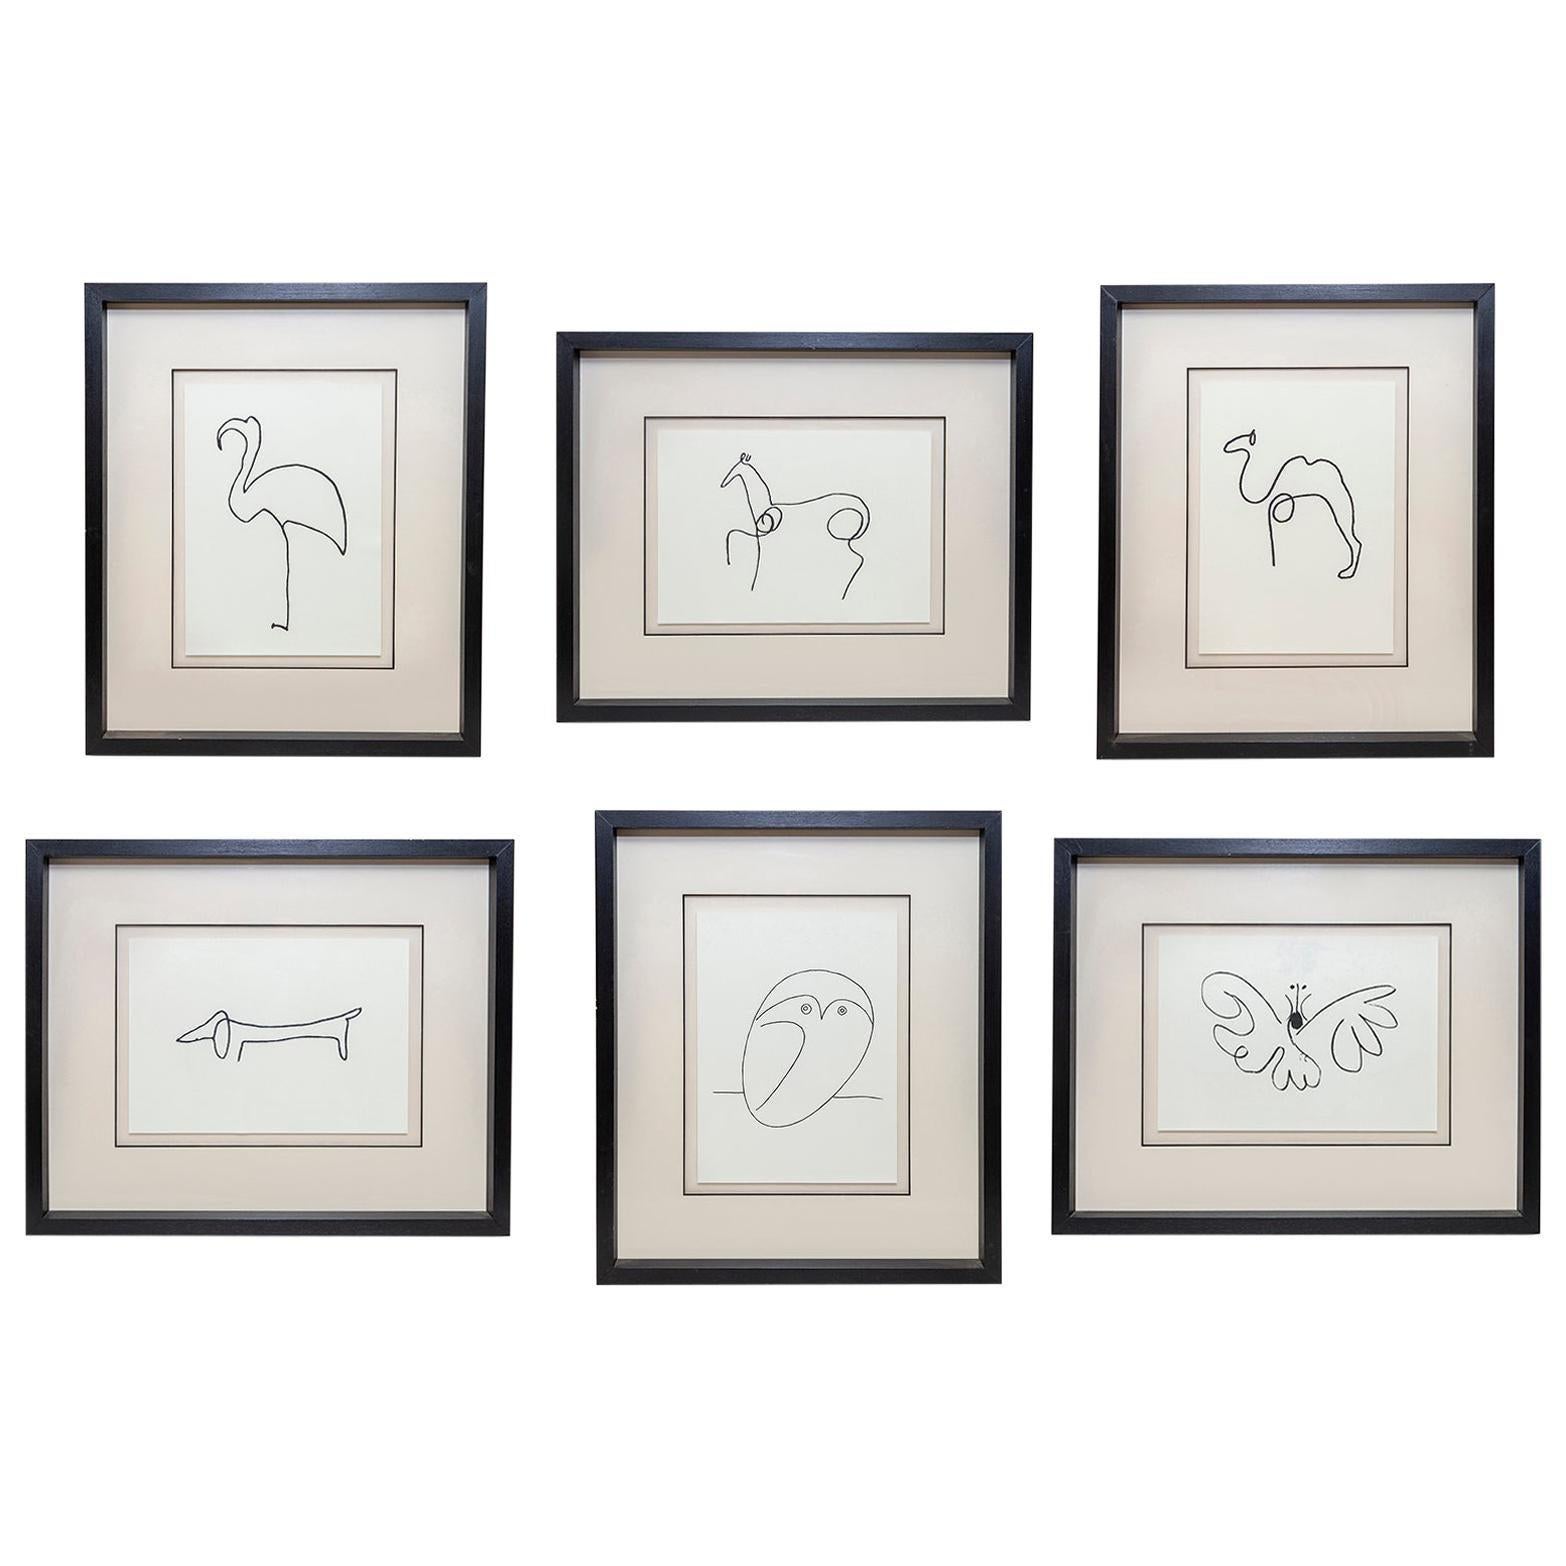 Picasso Dog - 3 For Sale on 1stDibs | picasso dog drawing, picasso 